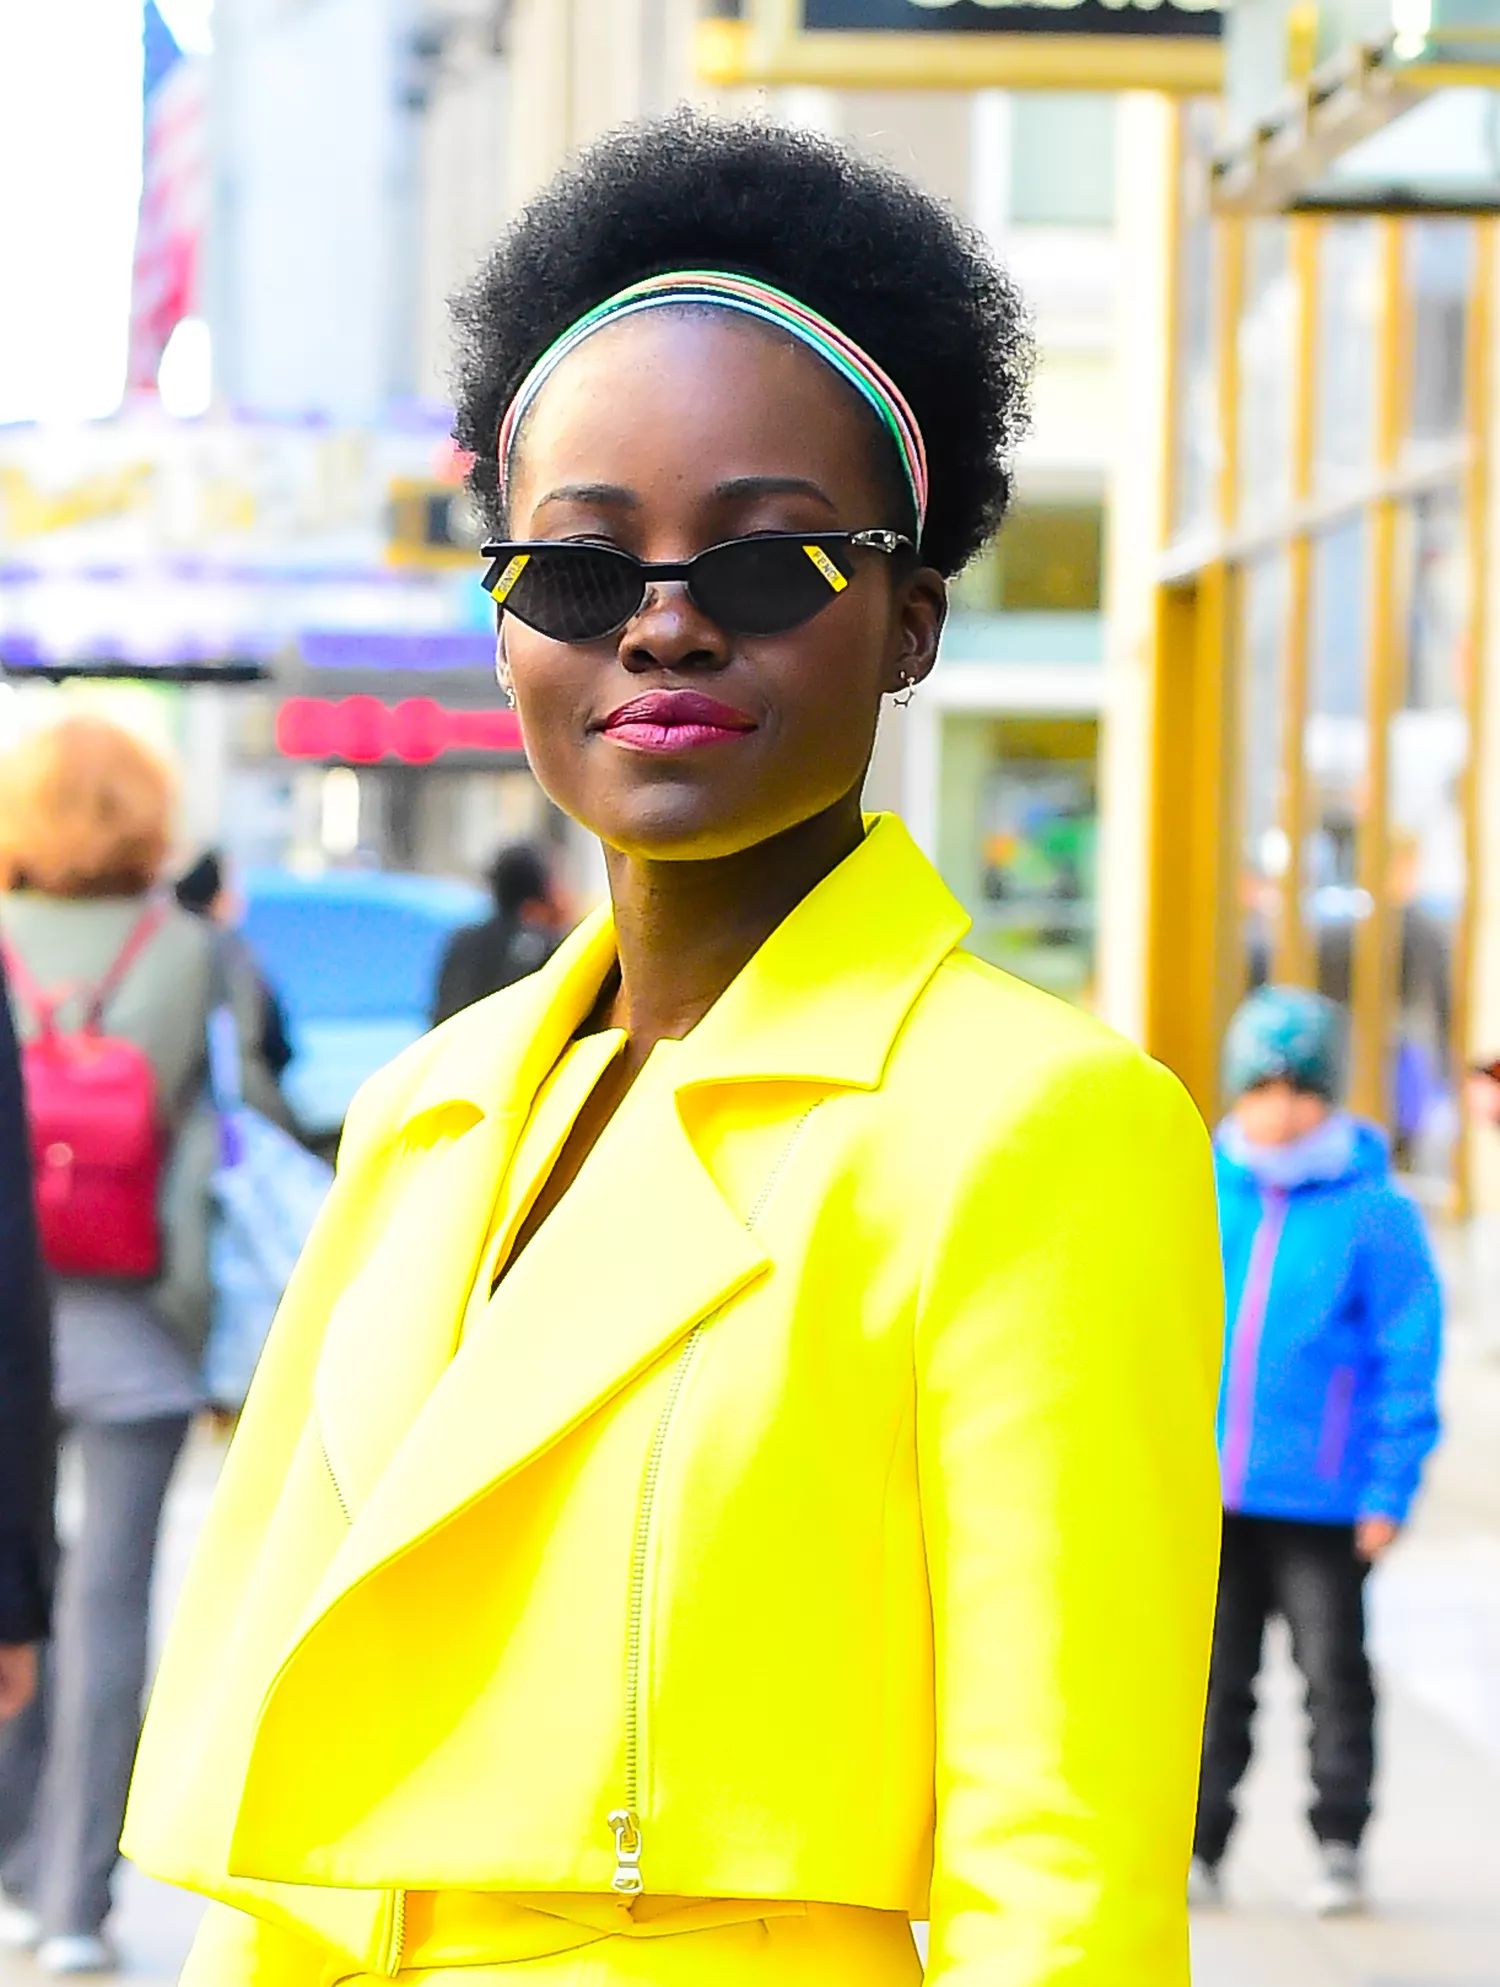 Lupita Nyong'o in Midtown New York wearing a yellow suit and magenta lipstick